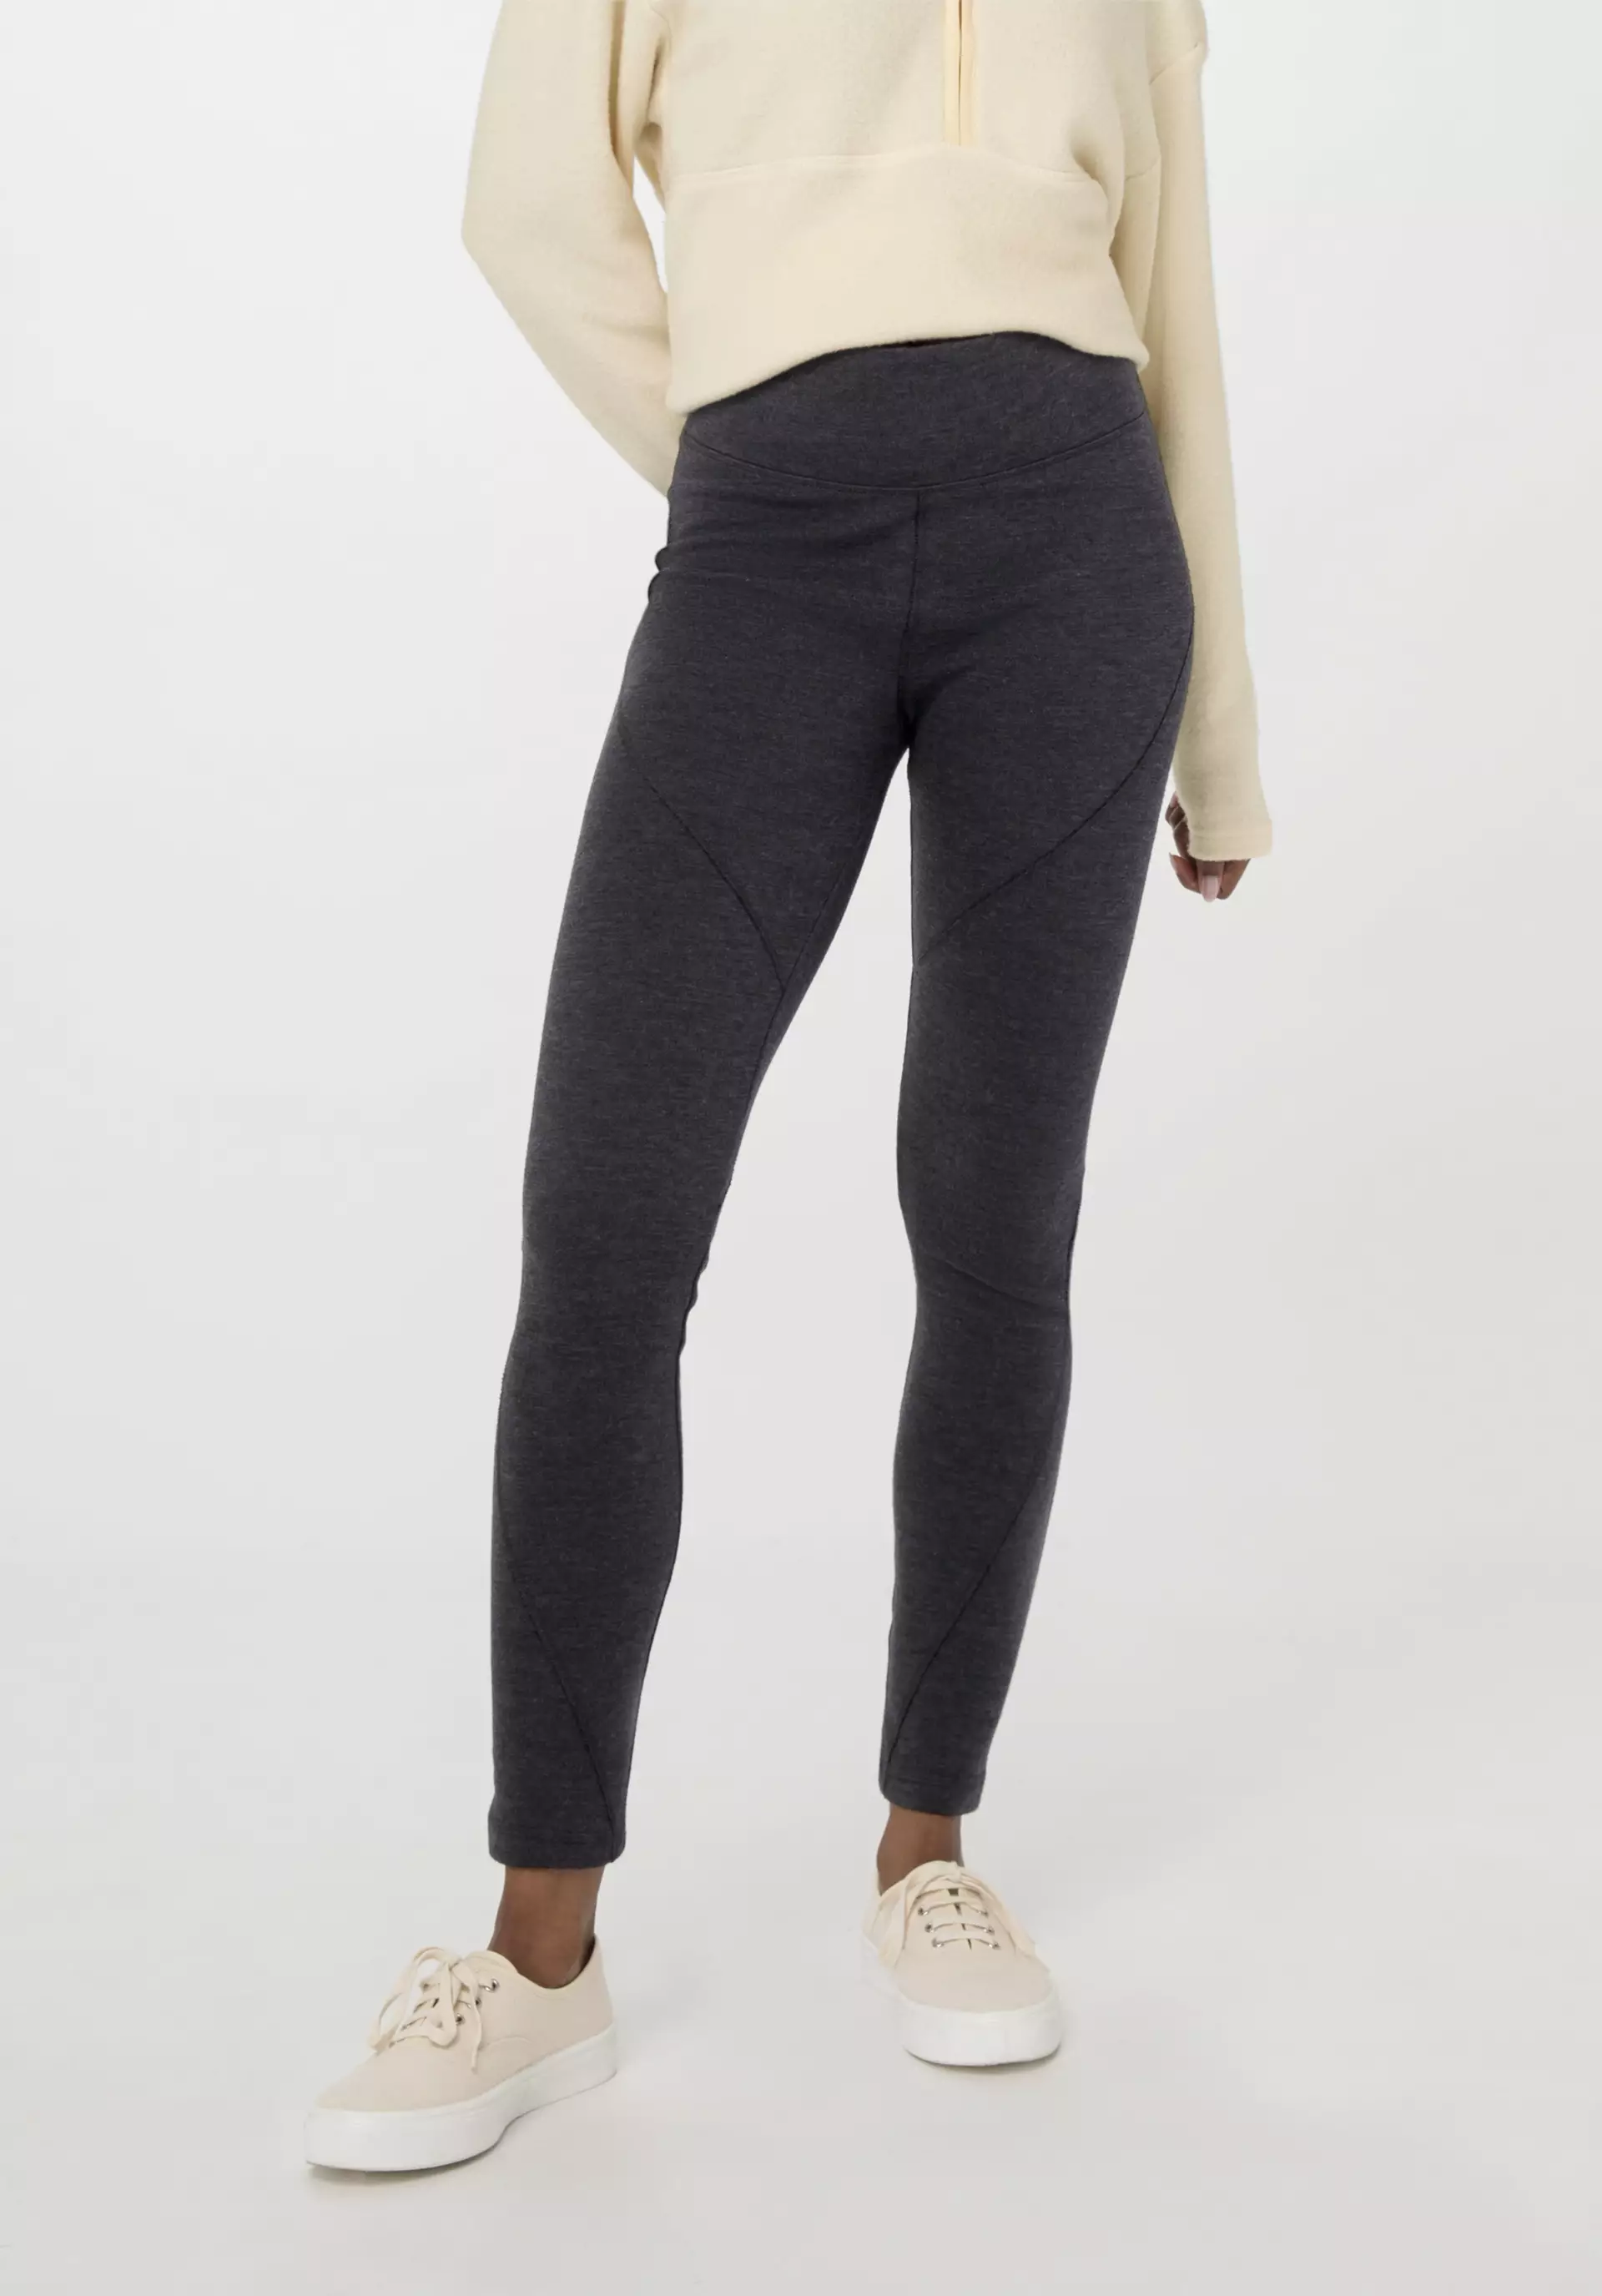 Leggings Fitted Medium Cut ACTIVE FUNCTIONAL made of organic merino wool with organic cotton - 1